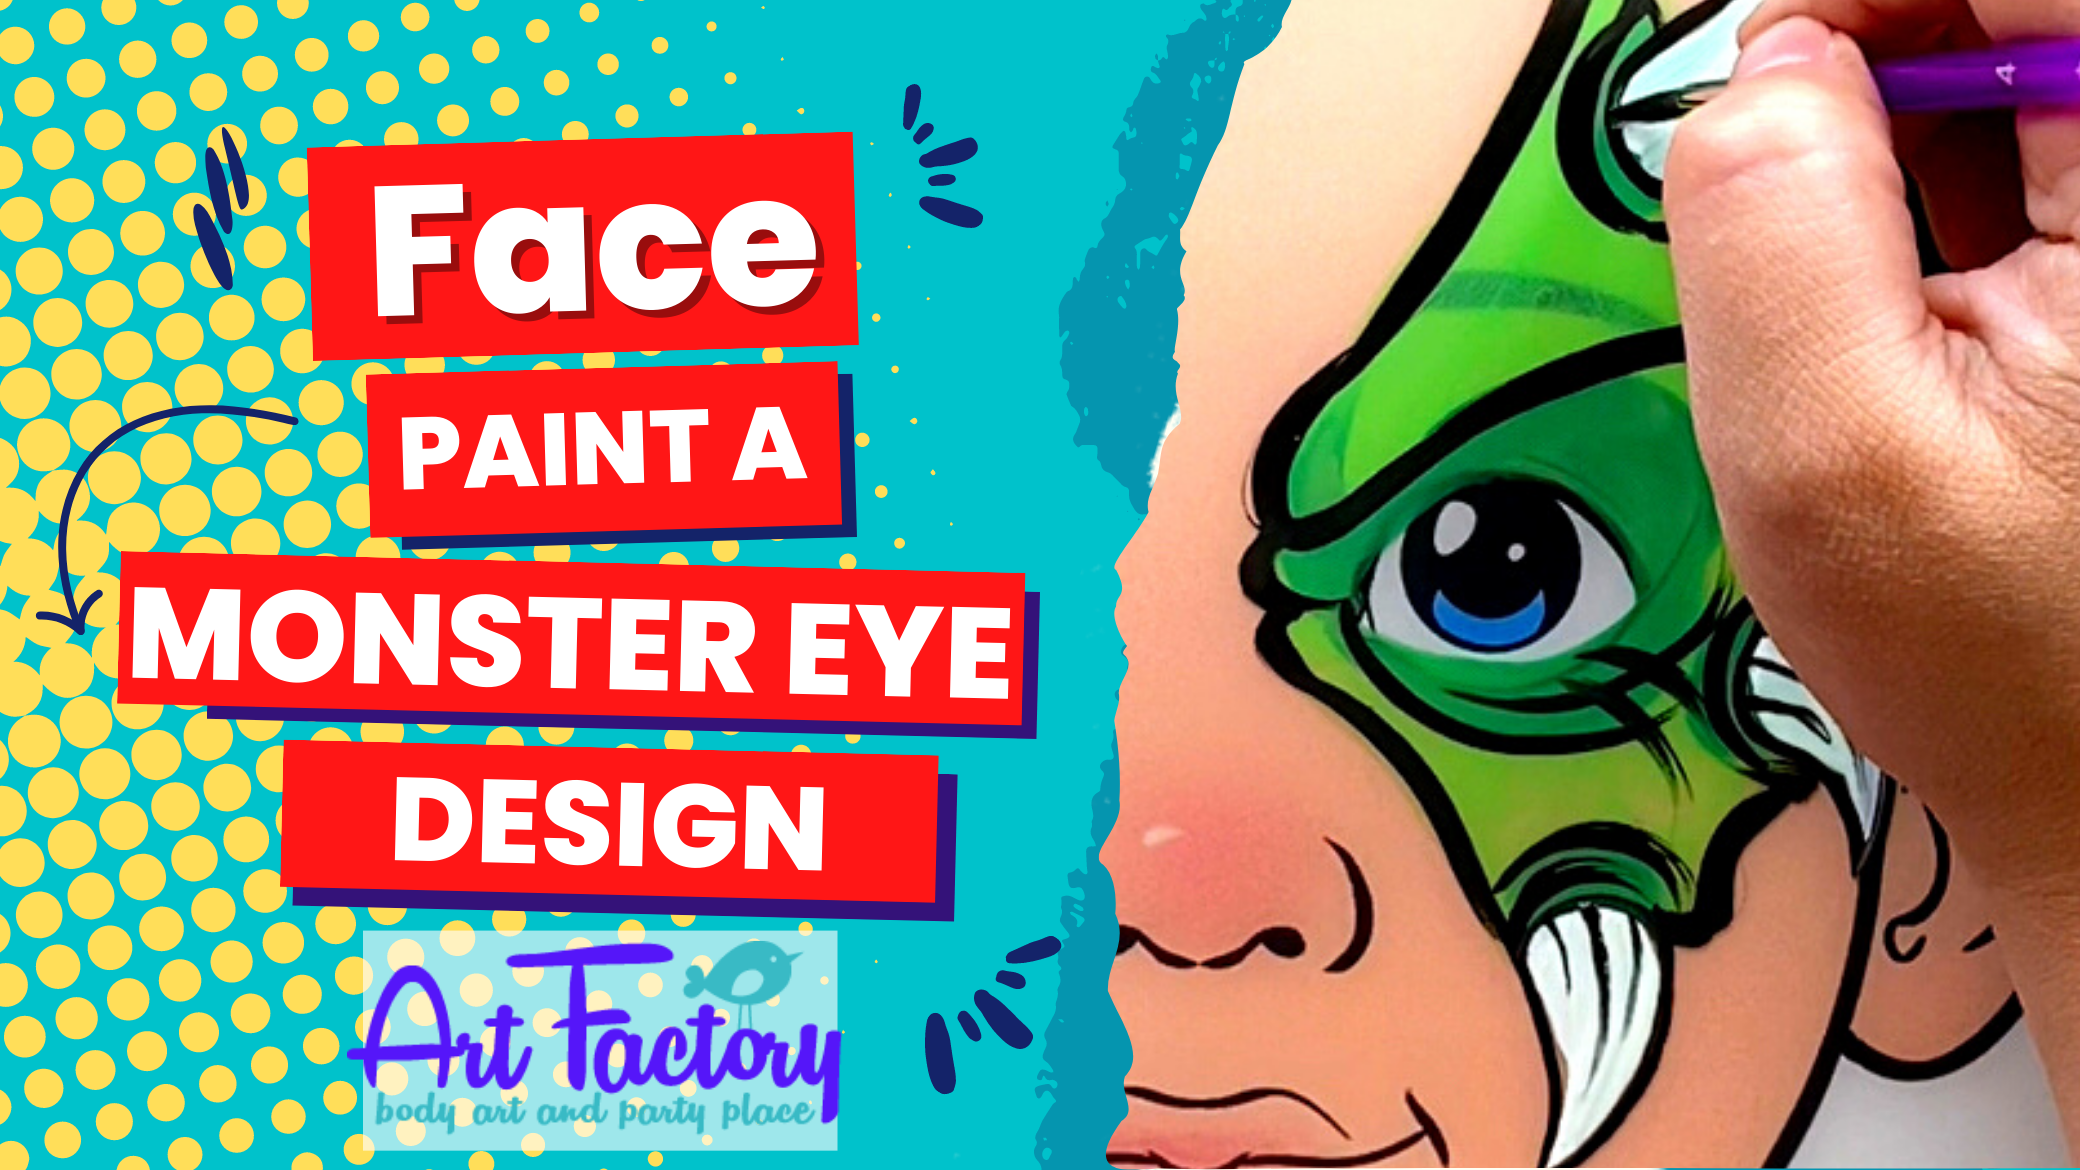 Image shows the words how to face paint a monster eye design.